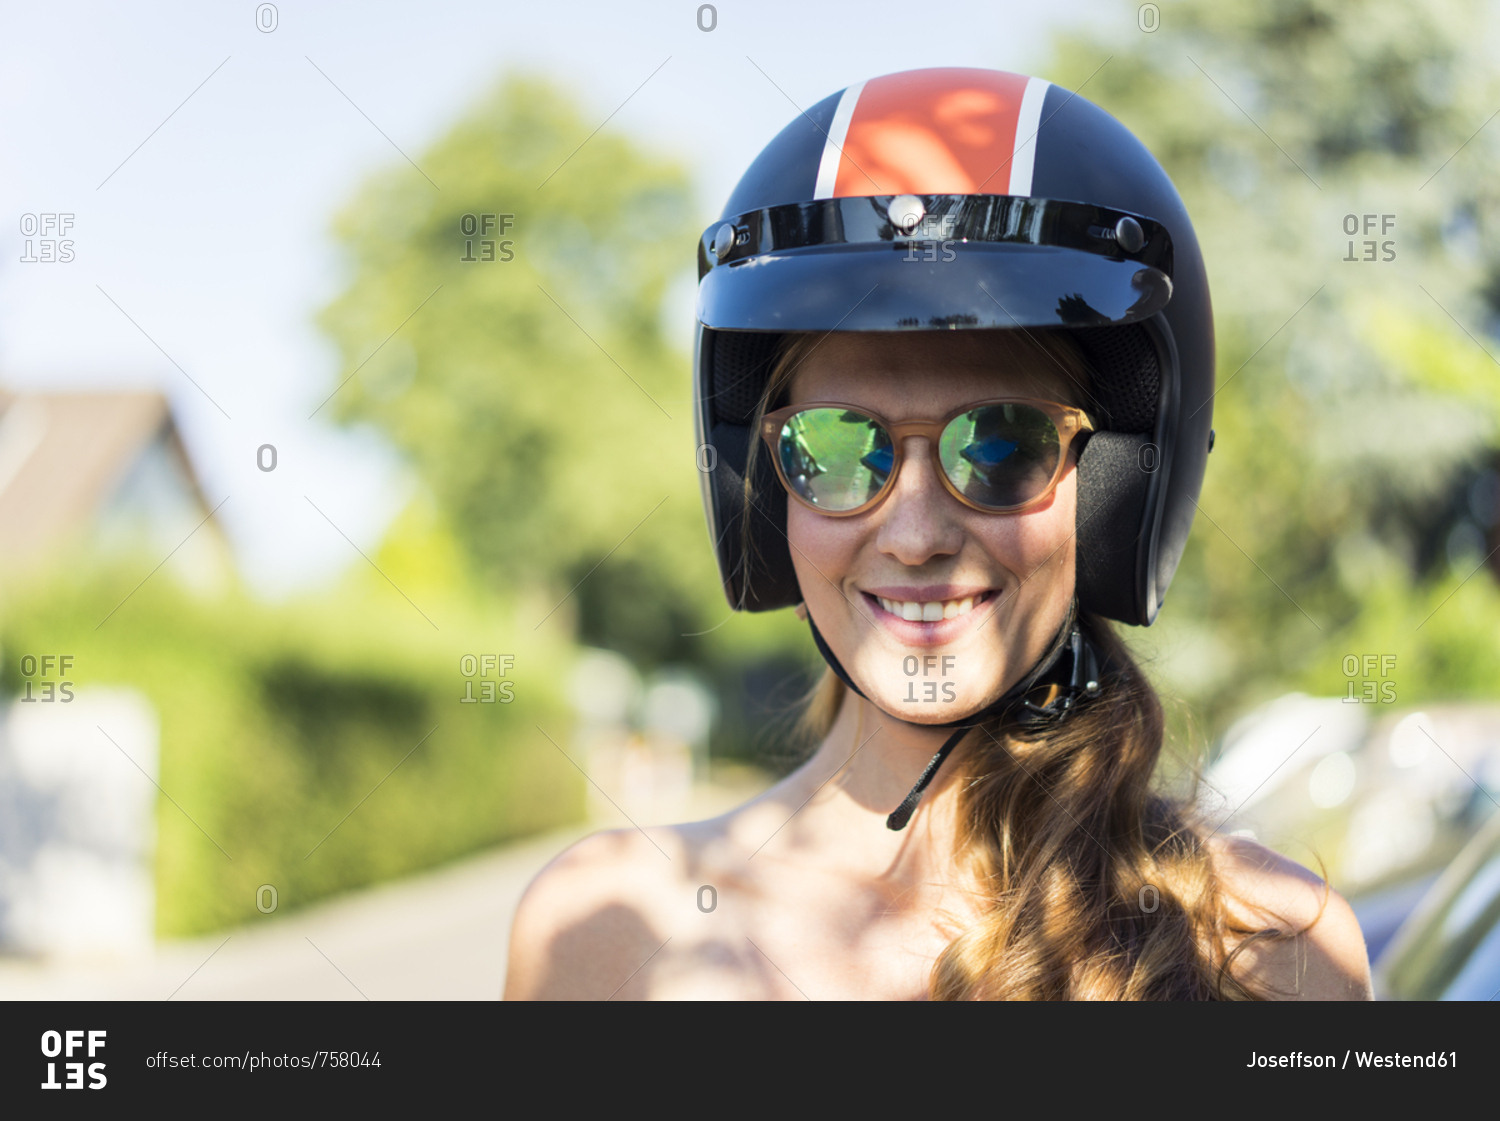 Portrait of smiling woman wearing sunglasses and motorcycle helmet